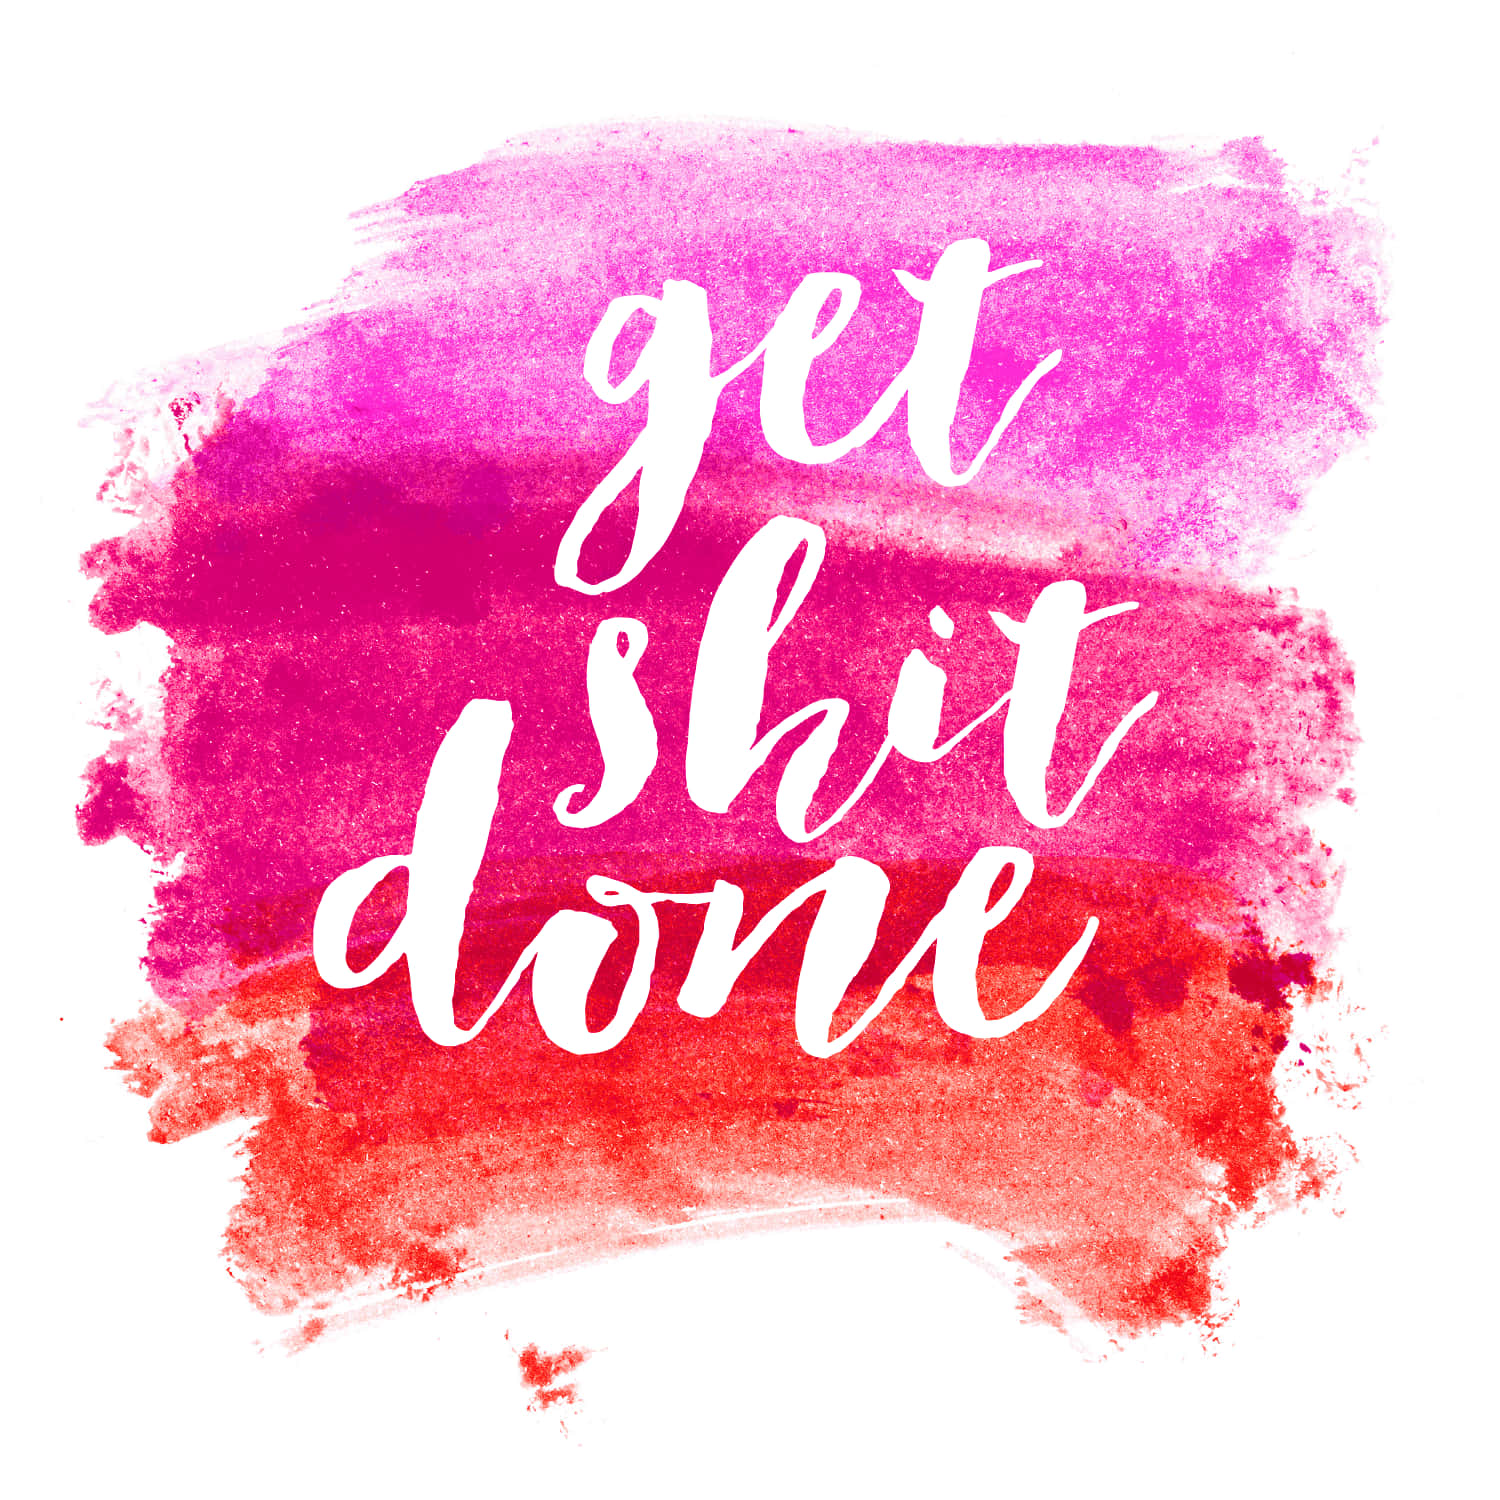 Get Shit Done - Watercolor Brush Strokes Wallpaper